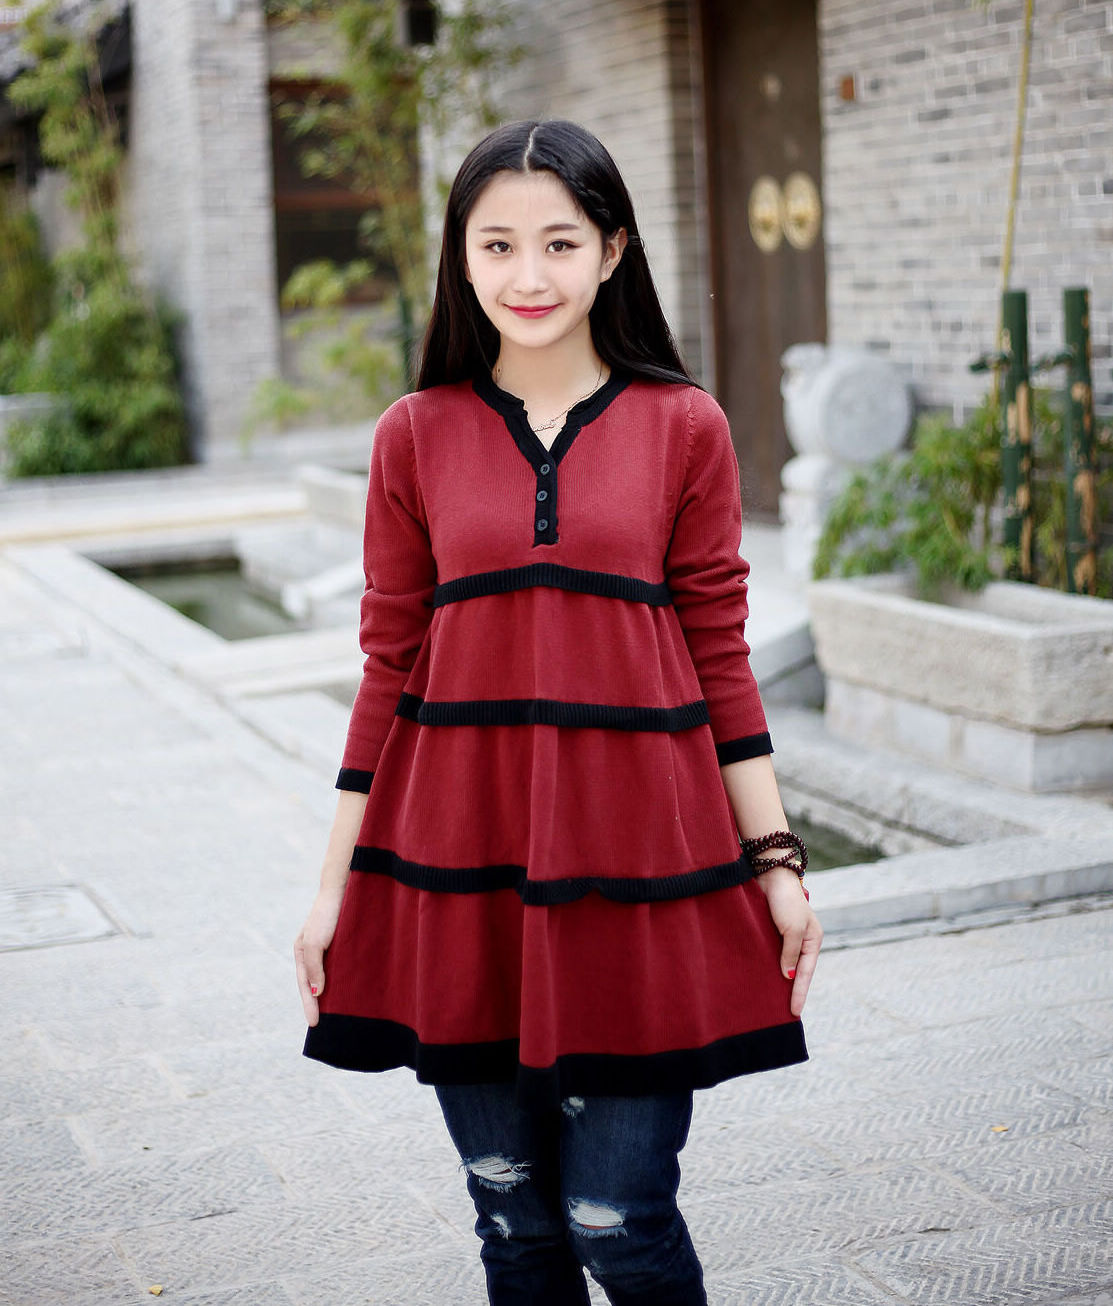 Cotton Sweater Winter Sweater Dresses Casual Loose Sweater Autumn Sweater Large Size Dress Winter Warm Sweater Tops